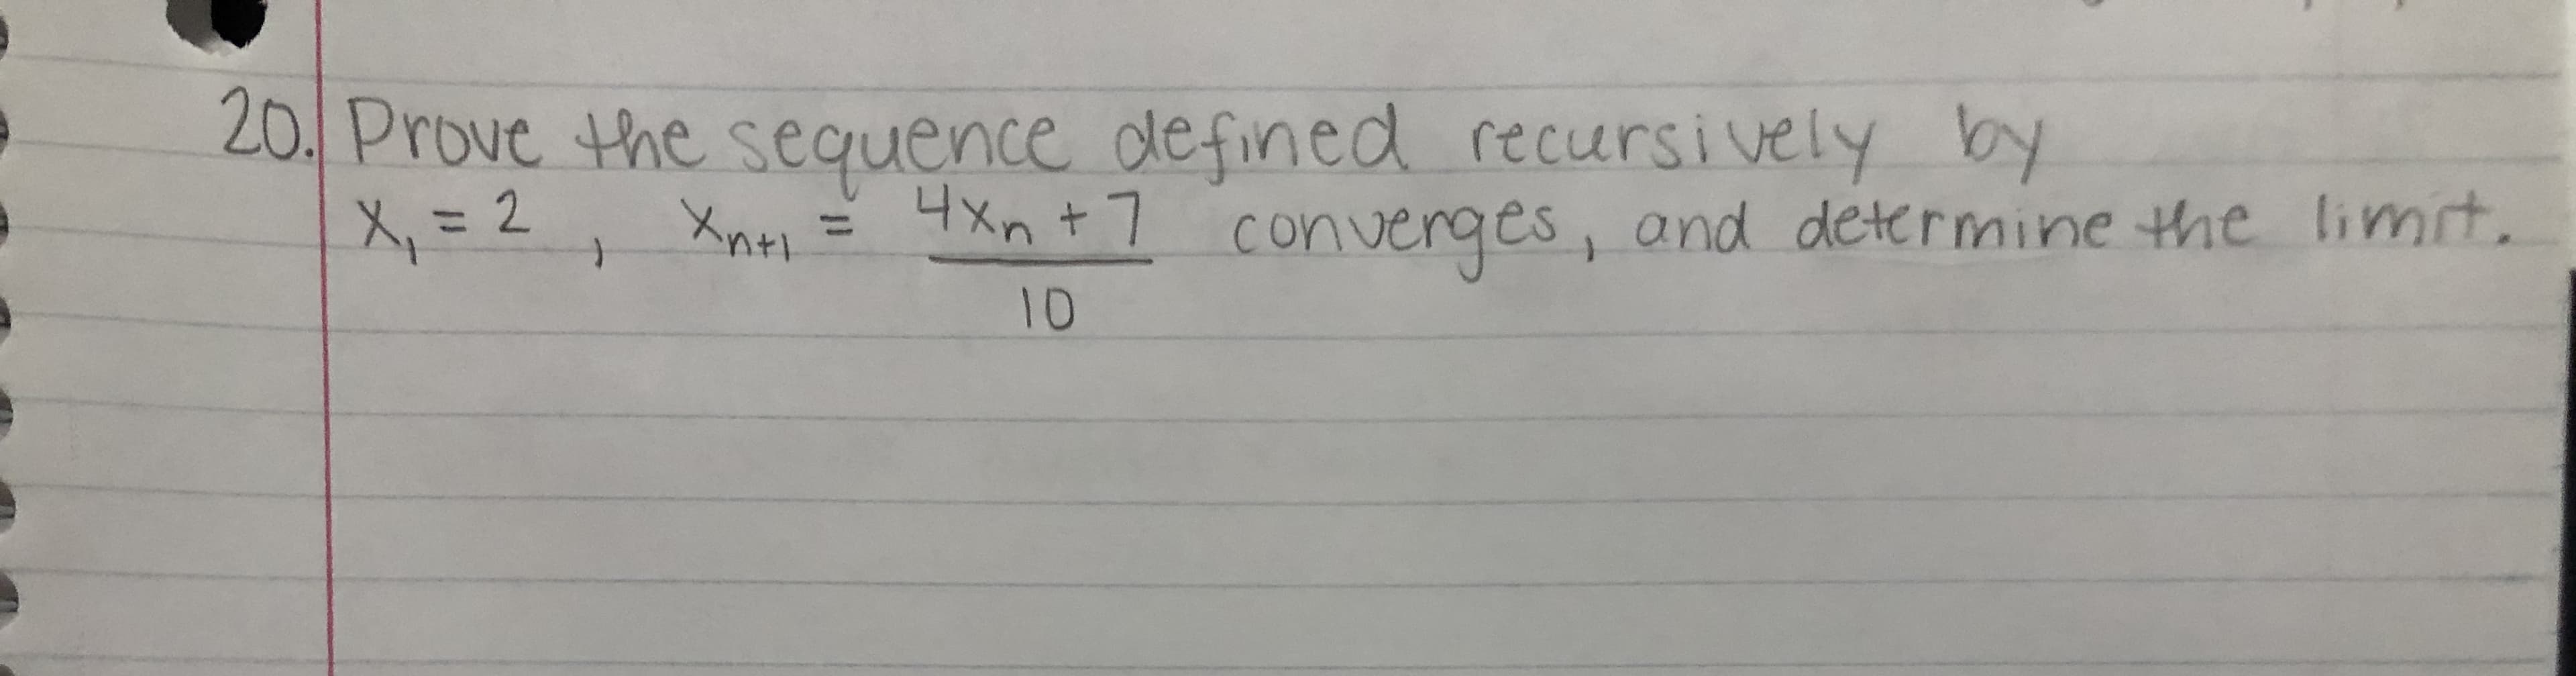 20. Prove the sequence defined recursively by
X, = 2, Xne = 4xn +7 converges, and determine the limit.
Xn+7 converges, and determine the limit.
%3D2
%3D
10
